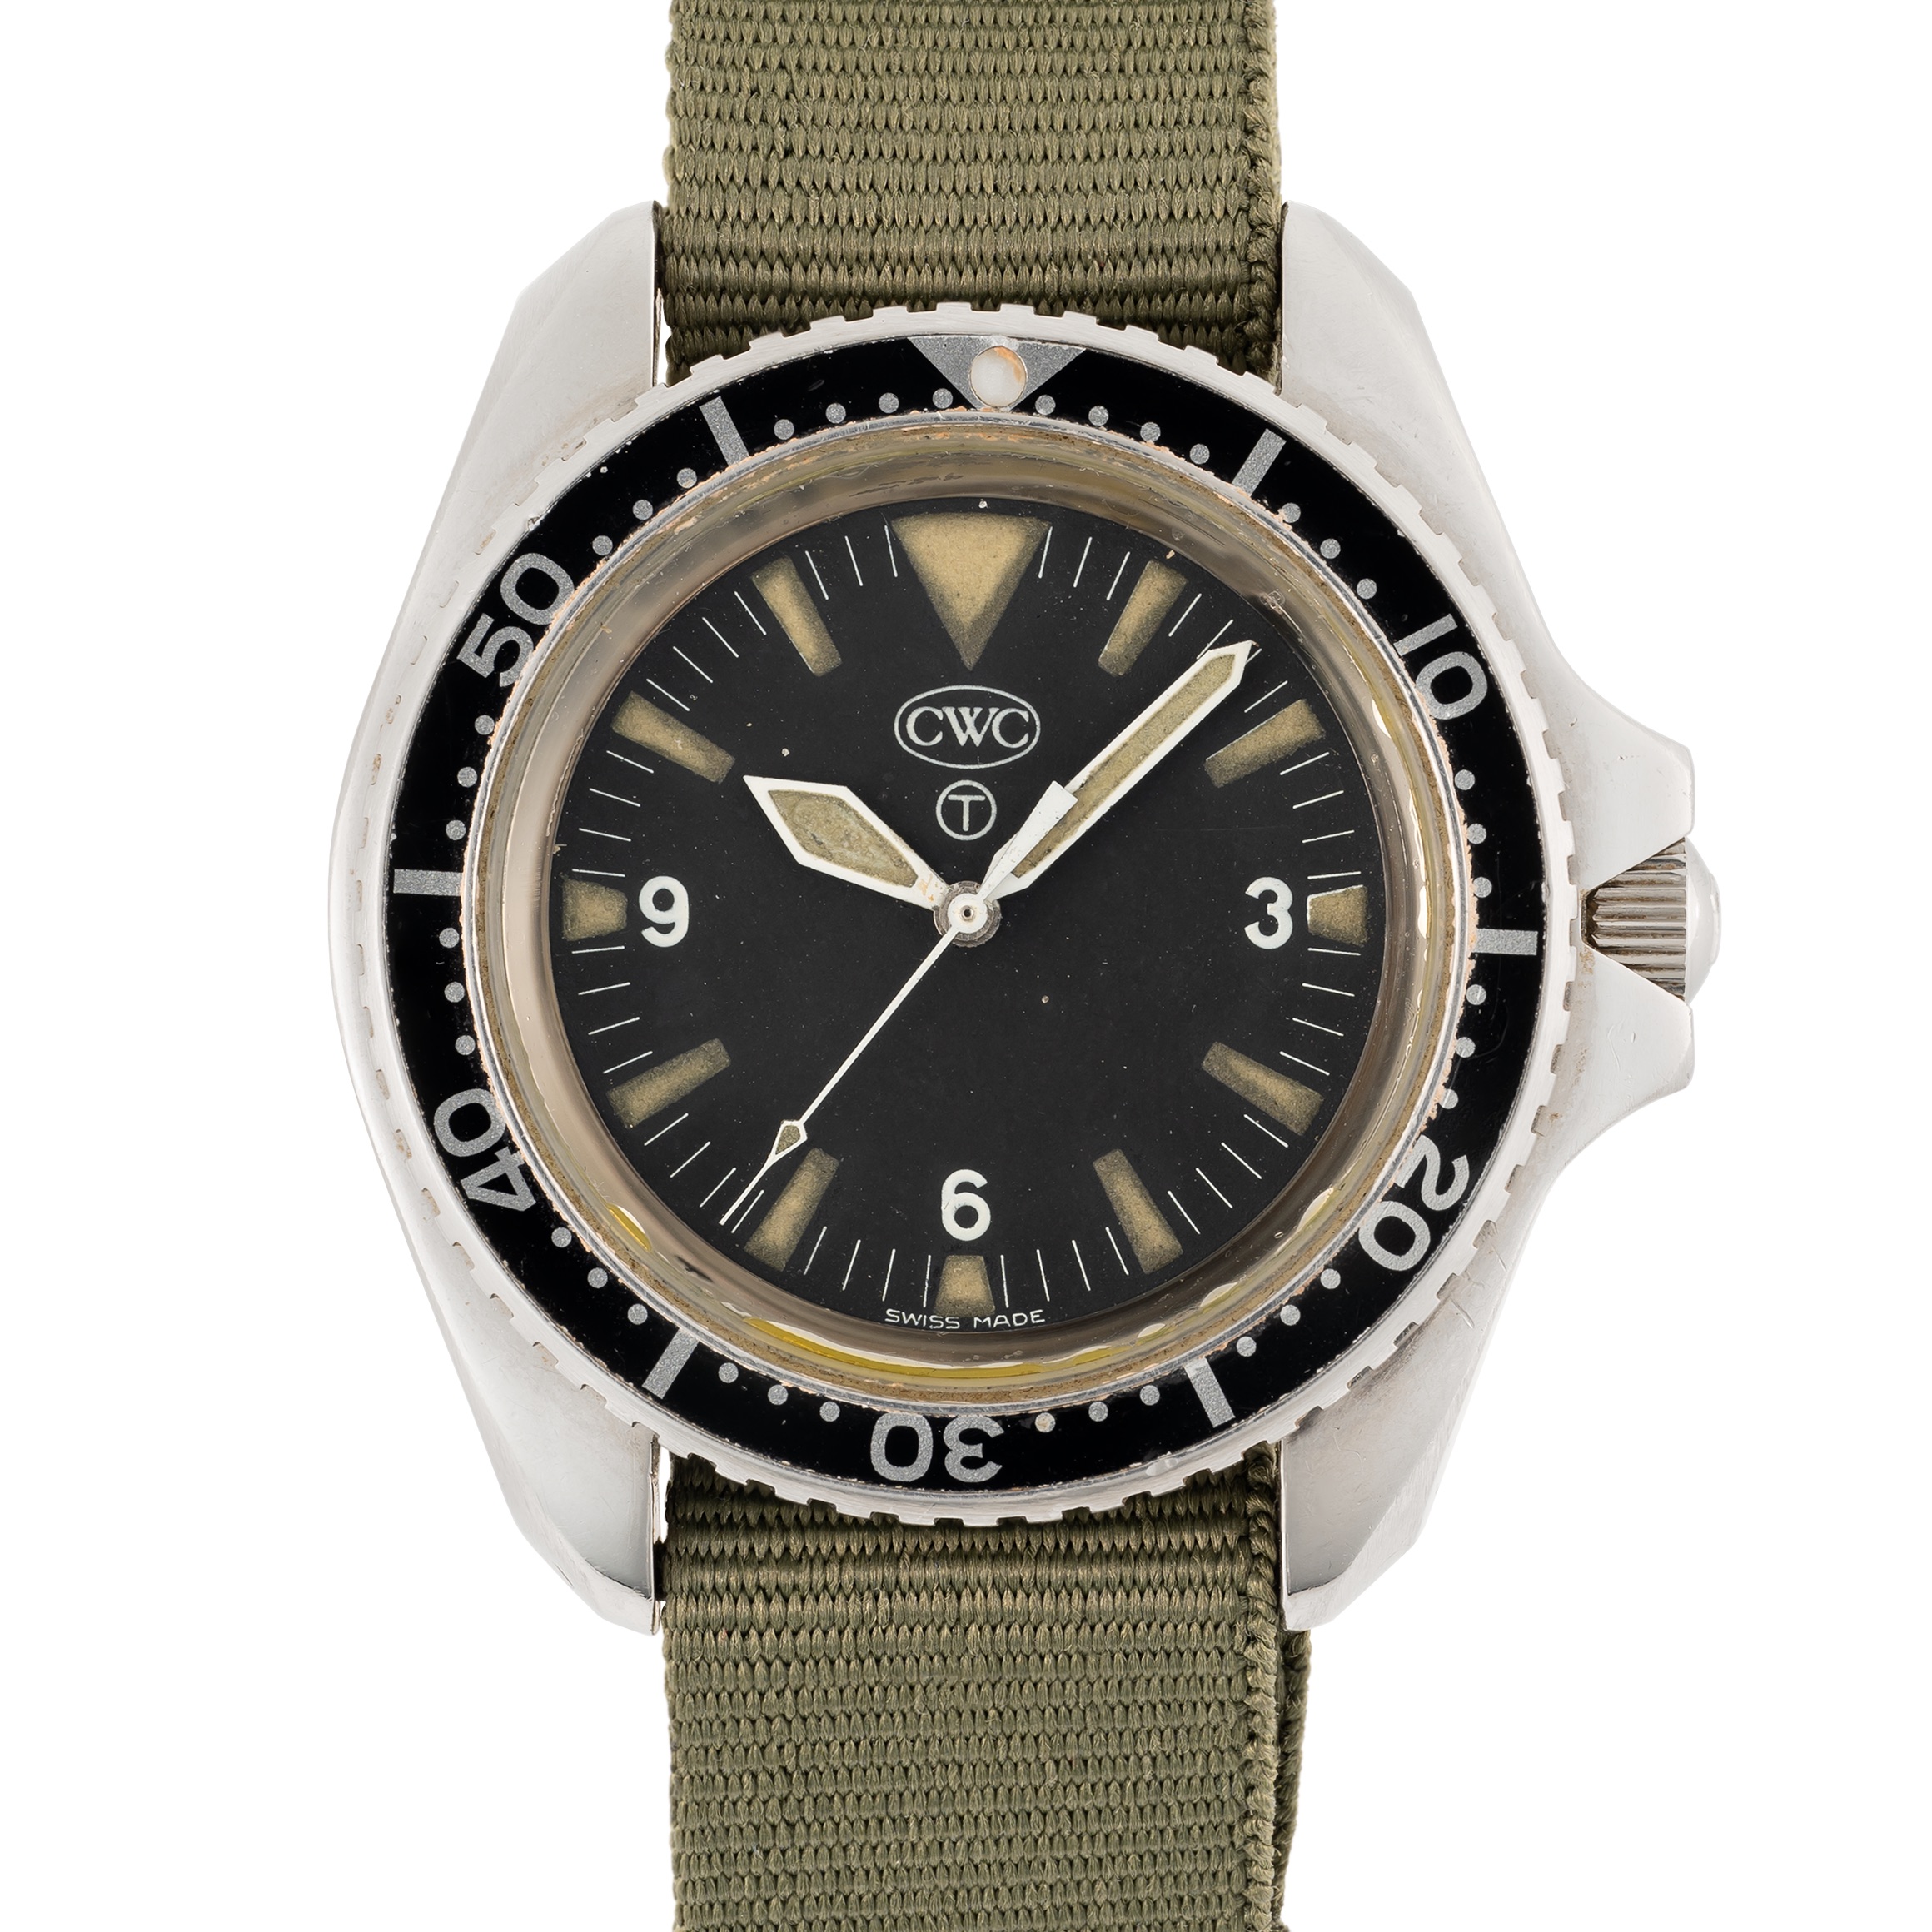 A VERY RARE GENTLEMAN'S STAINLESS STEEL BRITISH MILITARY ROYAL NAVY CWC AUTOMATIC DIVERS WRIST WATCH - Image 9 of 9